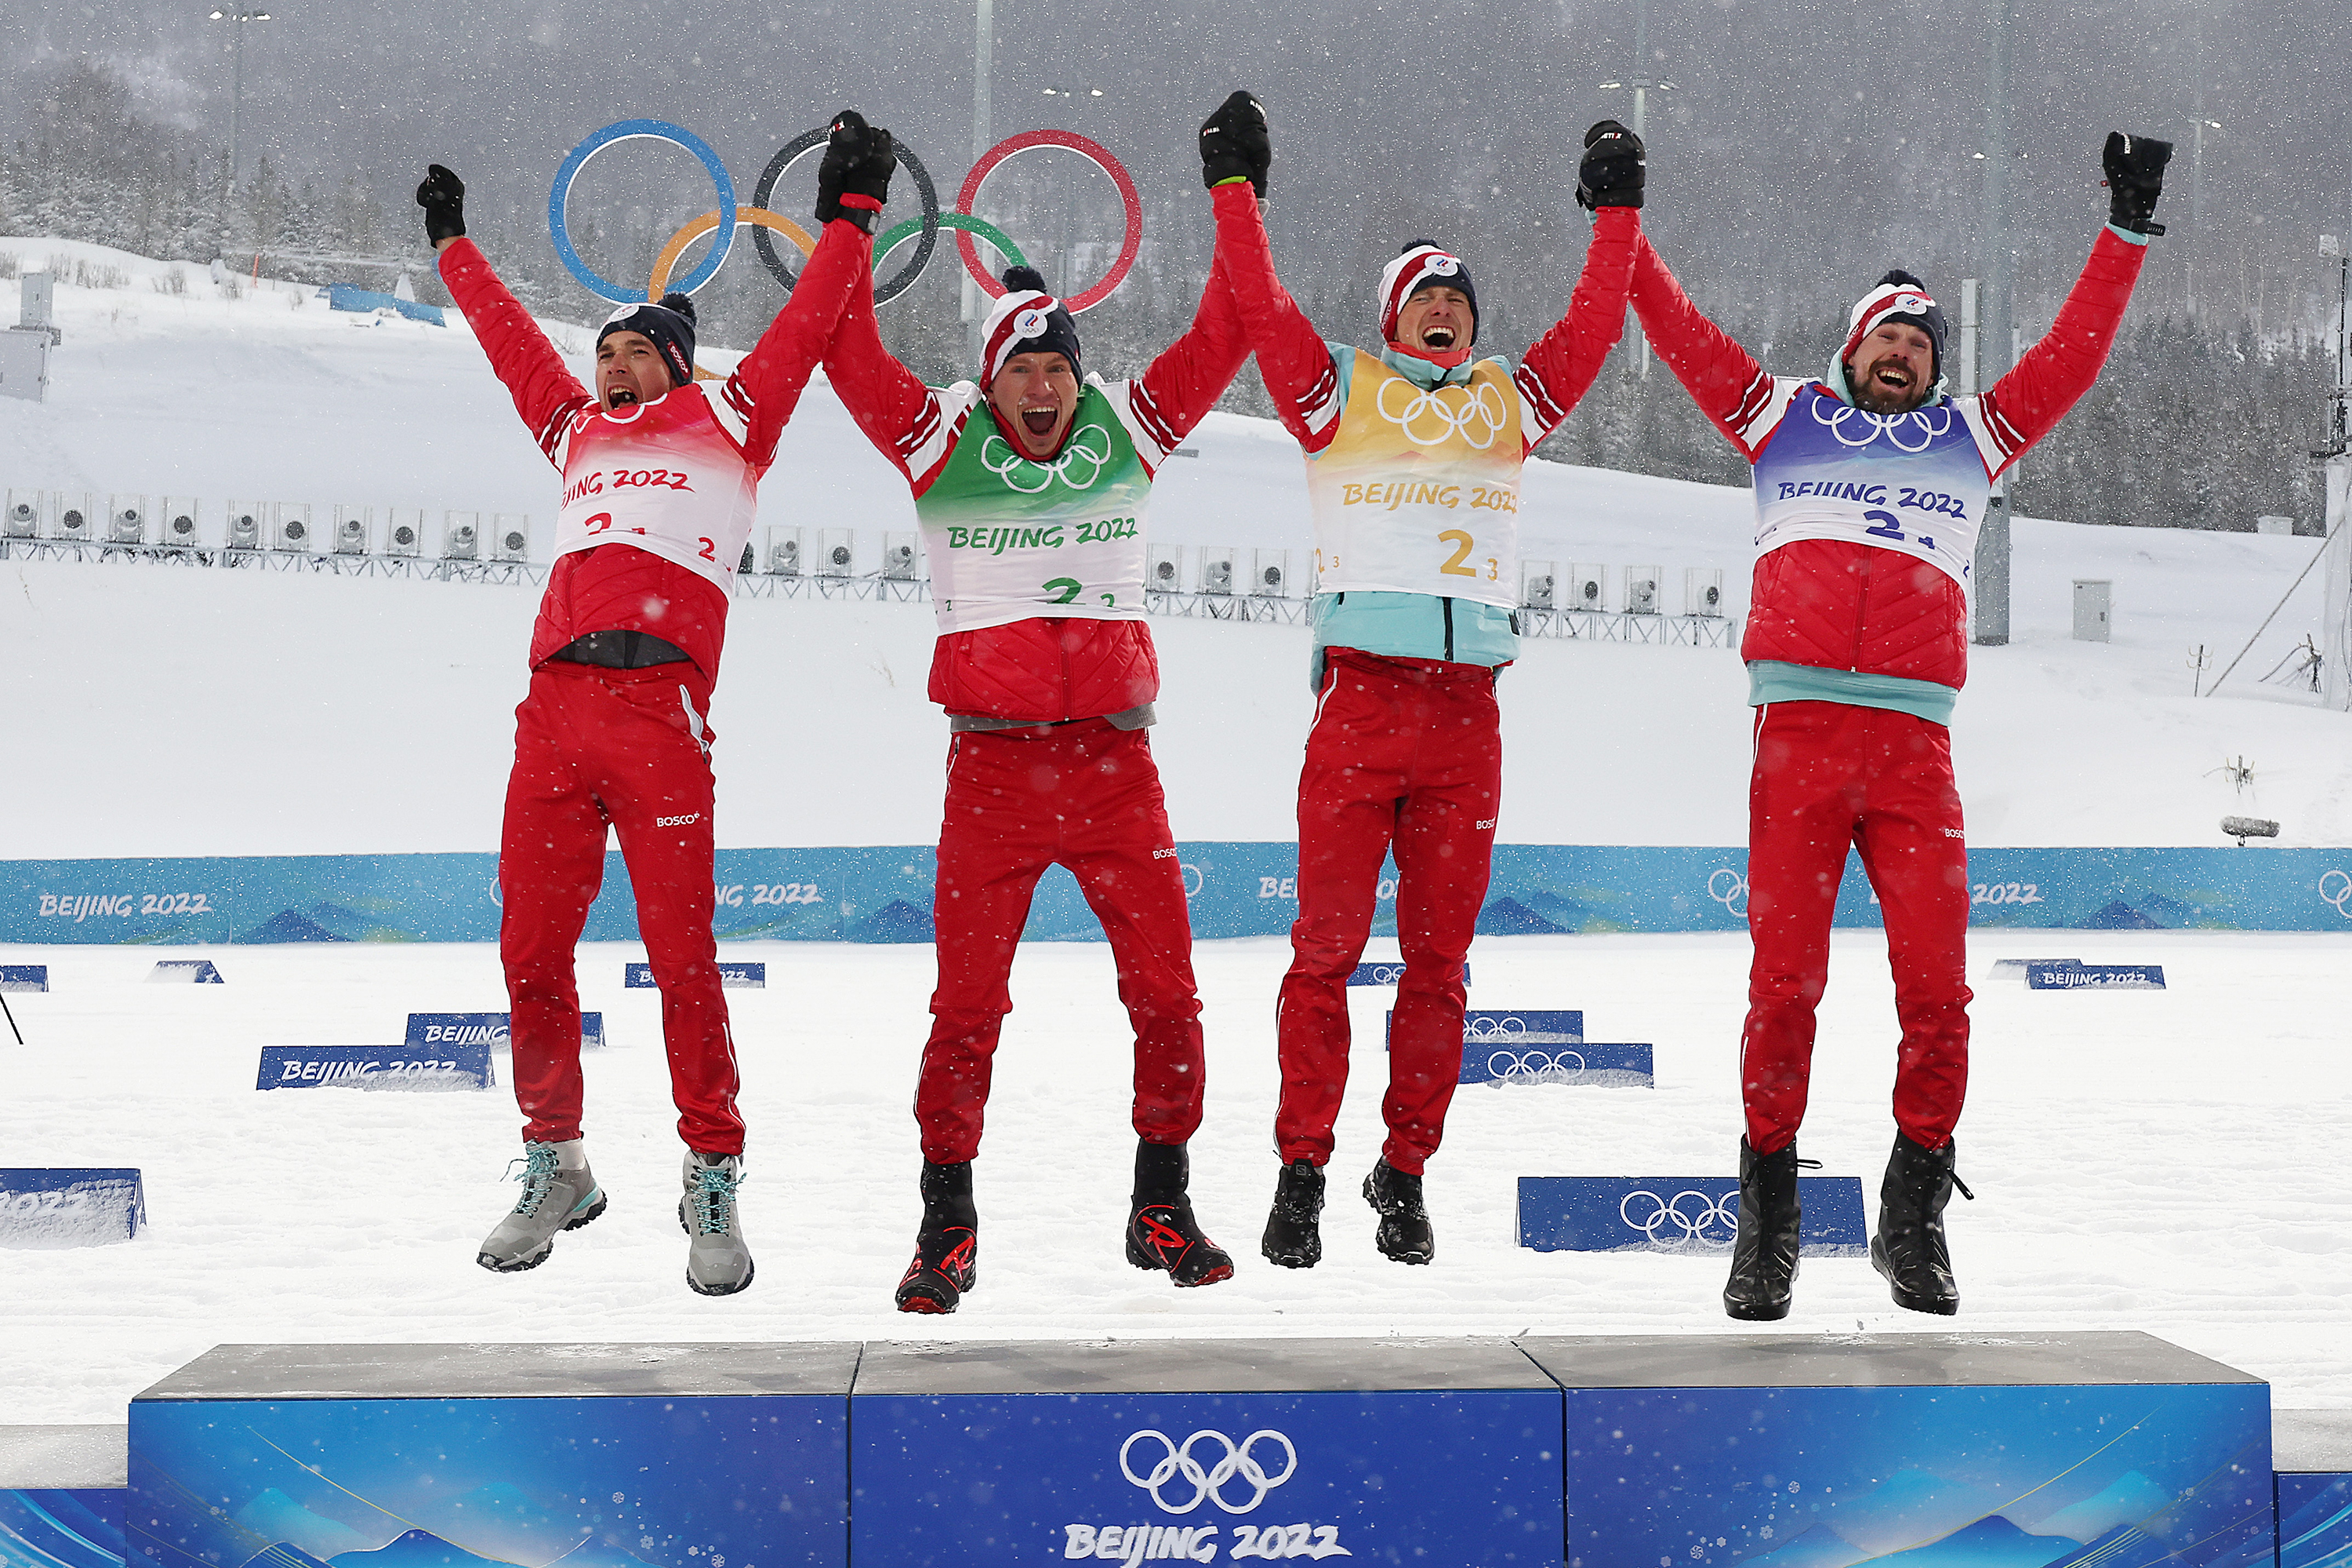 Team ROC celebrates after winning the men's cross-country skiing 4x10km relay on Feb. 13.